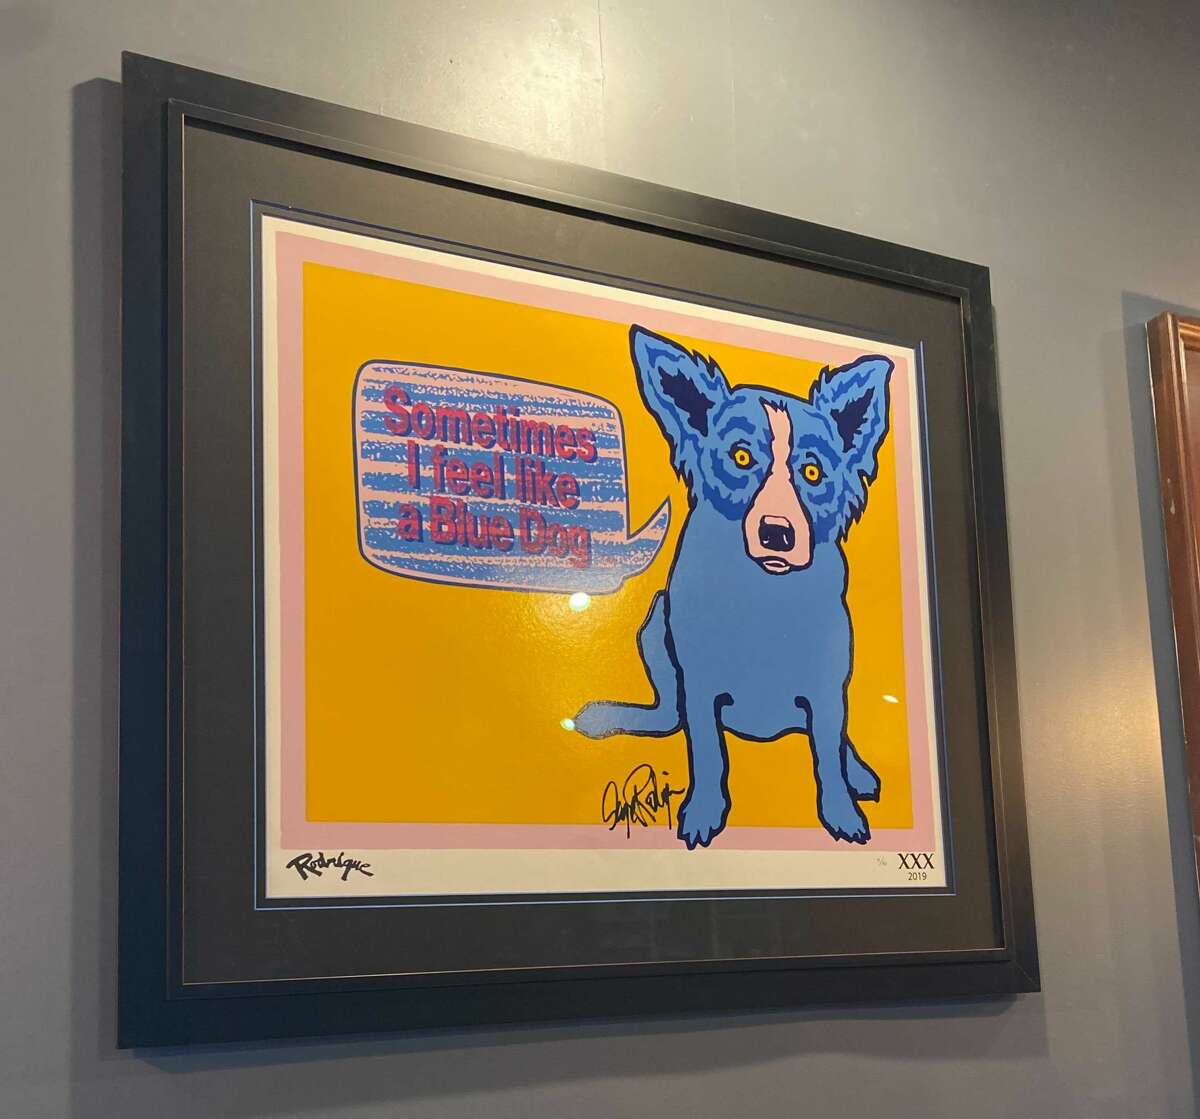 At Roux, a “Blue Dog” portrait by Louisiana artist George Rodrigue hangs on the wall, based on the Cajun legend, the loup-garou (a mythical werewolf-like creature)